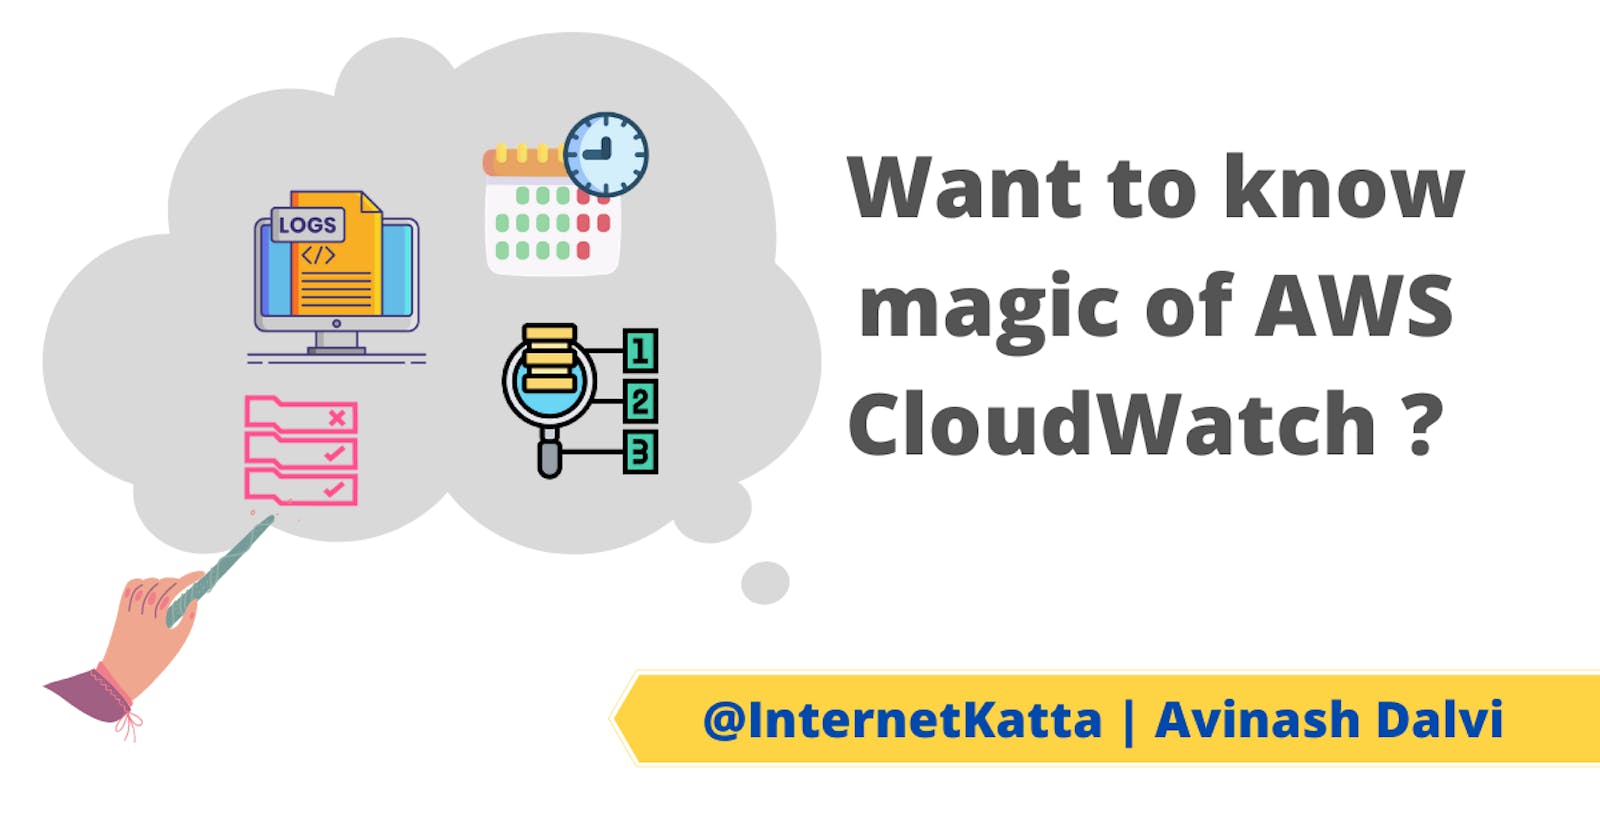 Want to know magic of AWS CloudWatch ?